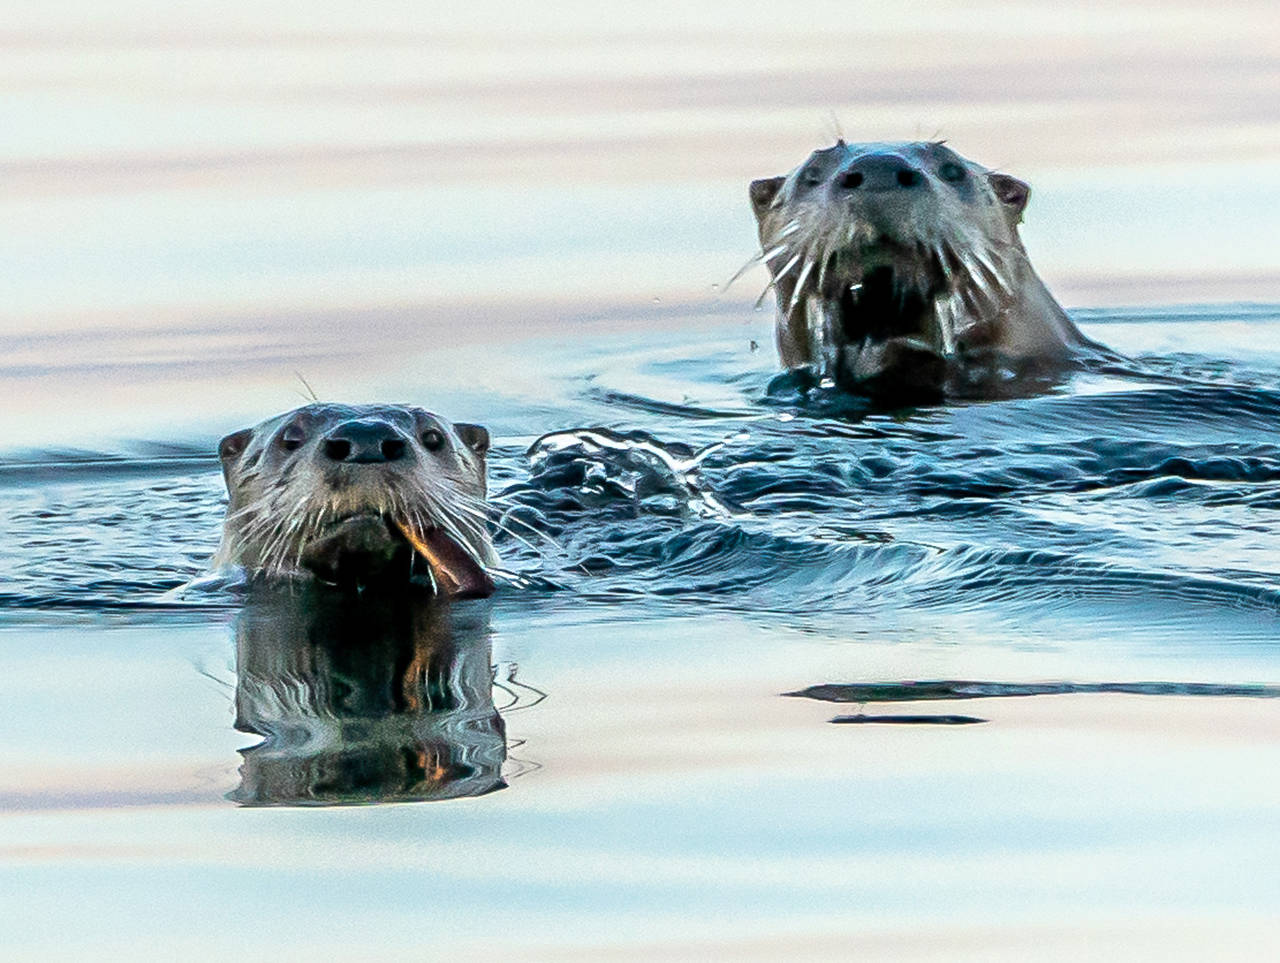 Otters are an “ecological canary in the coal mine.” (Heide Island)